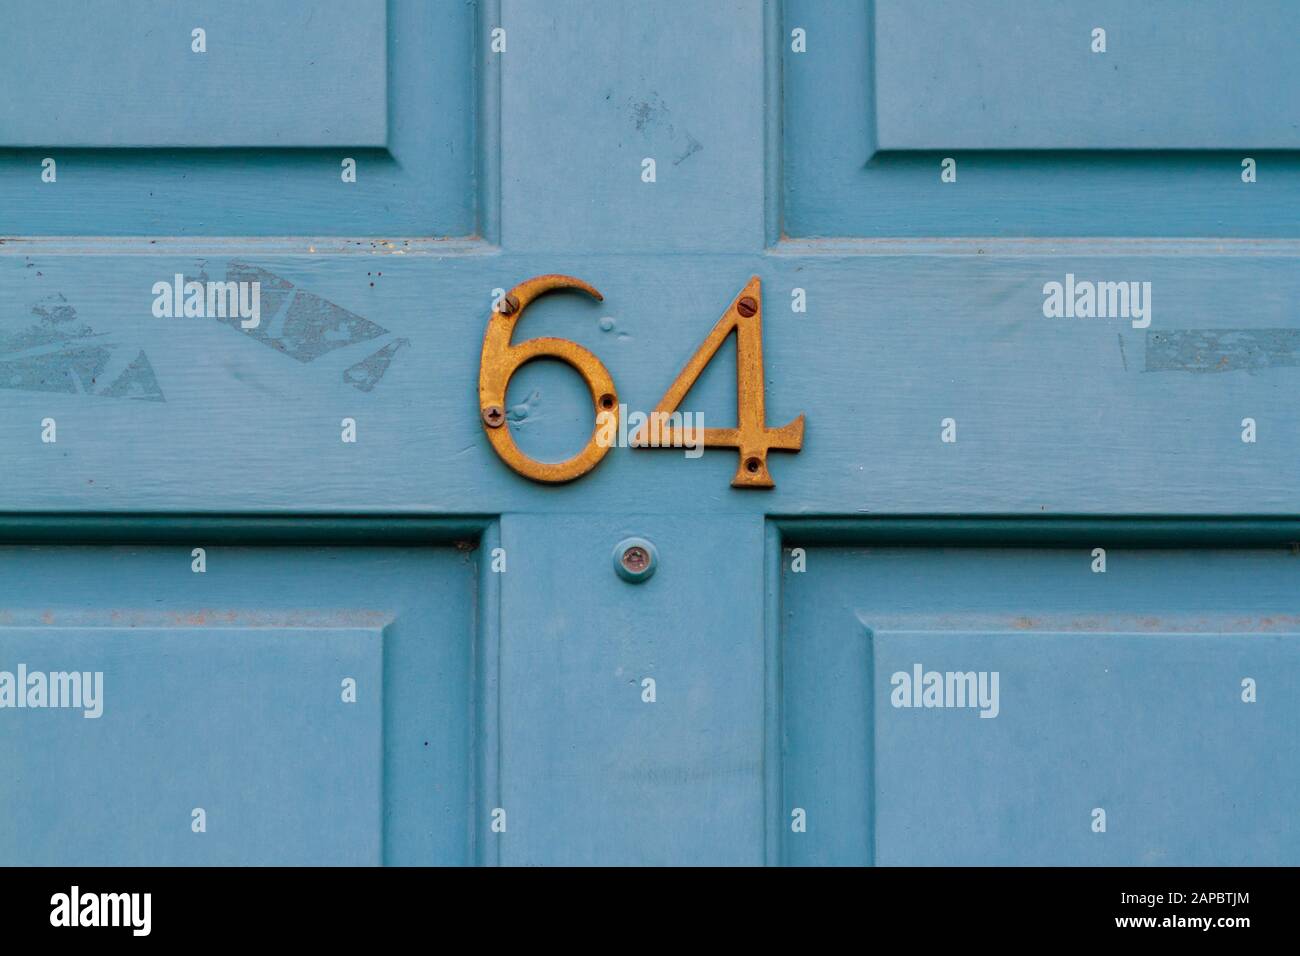 House number 64 Stock Photo